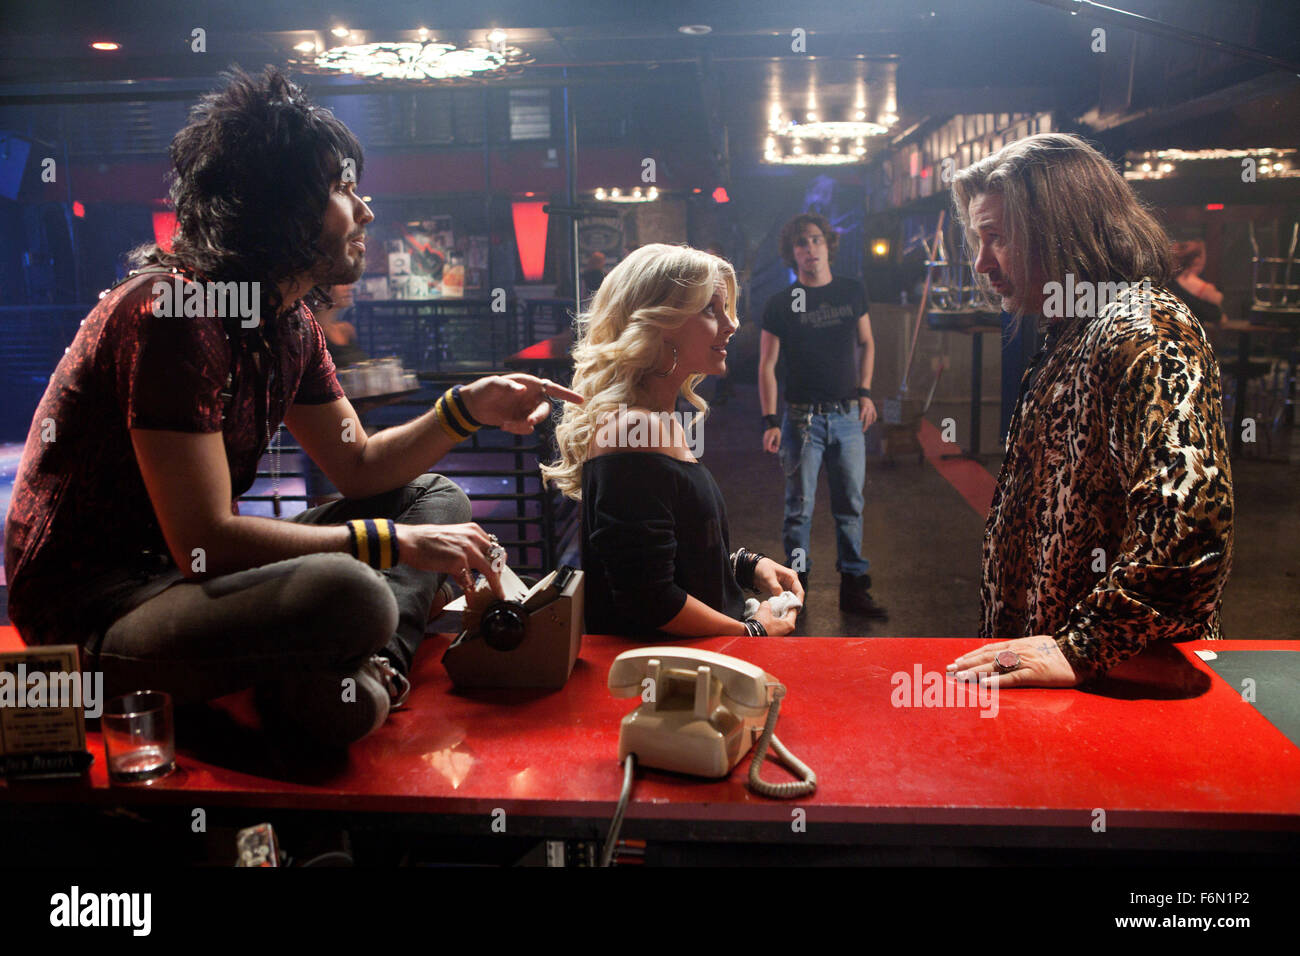 RELEASE DATE: June 1, 2012   MOVIE TITLE: Rock of Ages   STUDIO: Offspring Entertainment   DIRECTOR: Adam Shankman  PLOT: A small-town girl arrives in Hollywood at the height of the 1980s rock-music scene   PICTURED: (L-R) RUSSELL BRAND as Lonny, JULIANNE HOUGH as Sherrie Christian, DIEGO BONETA as Drew Boley, and ALEC BALDWIN as Dennis Dupree   (Credit Image: c Offspring Entertainment/Entertainment Pictures) Stock Photo